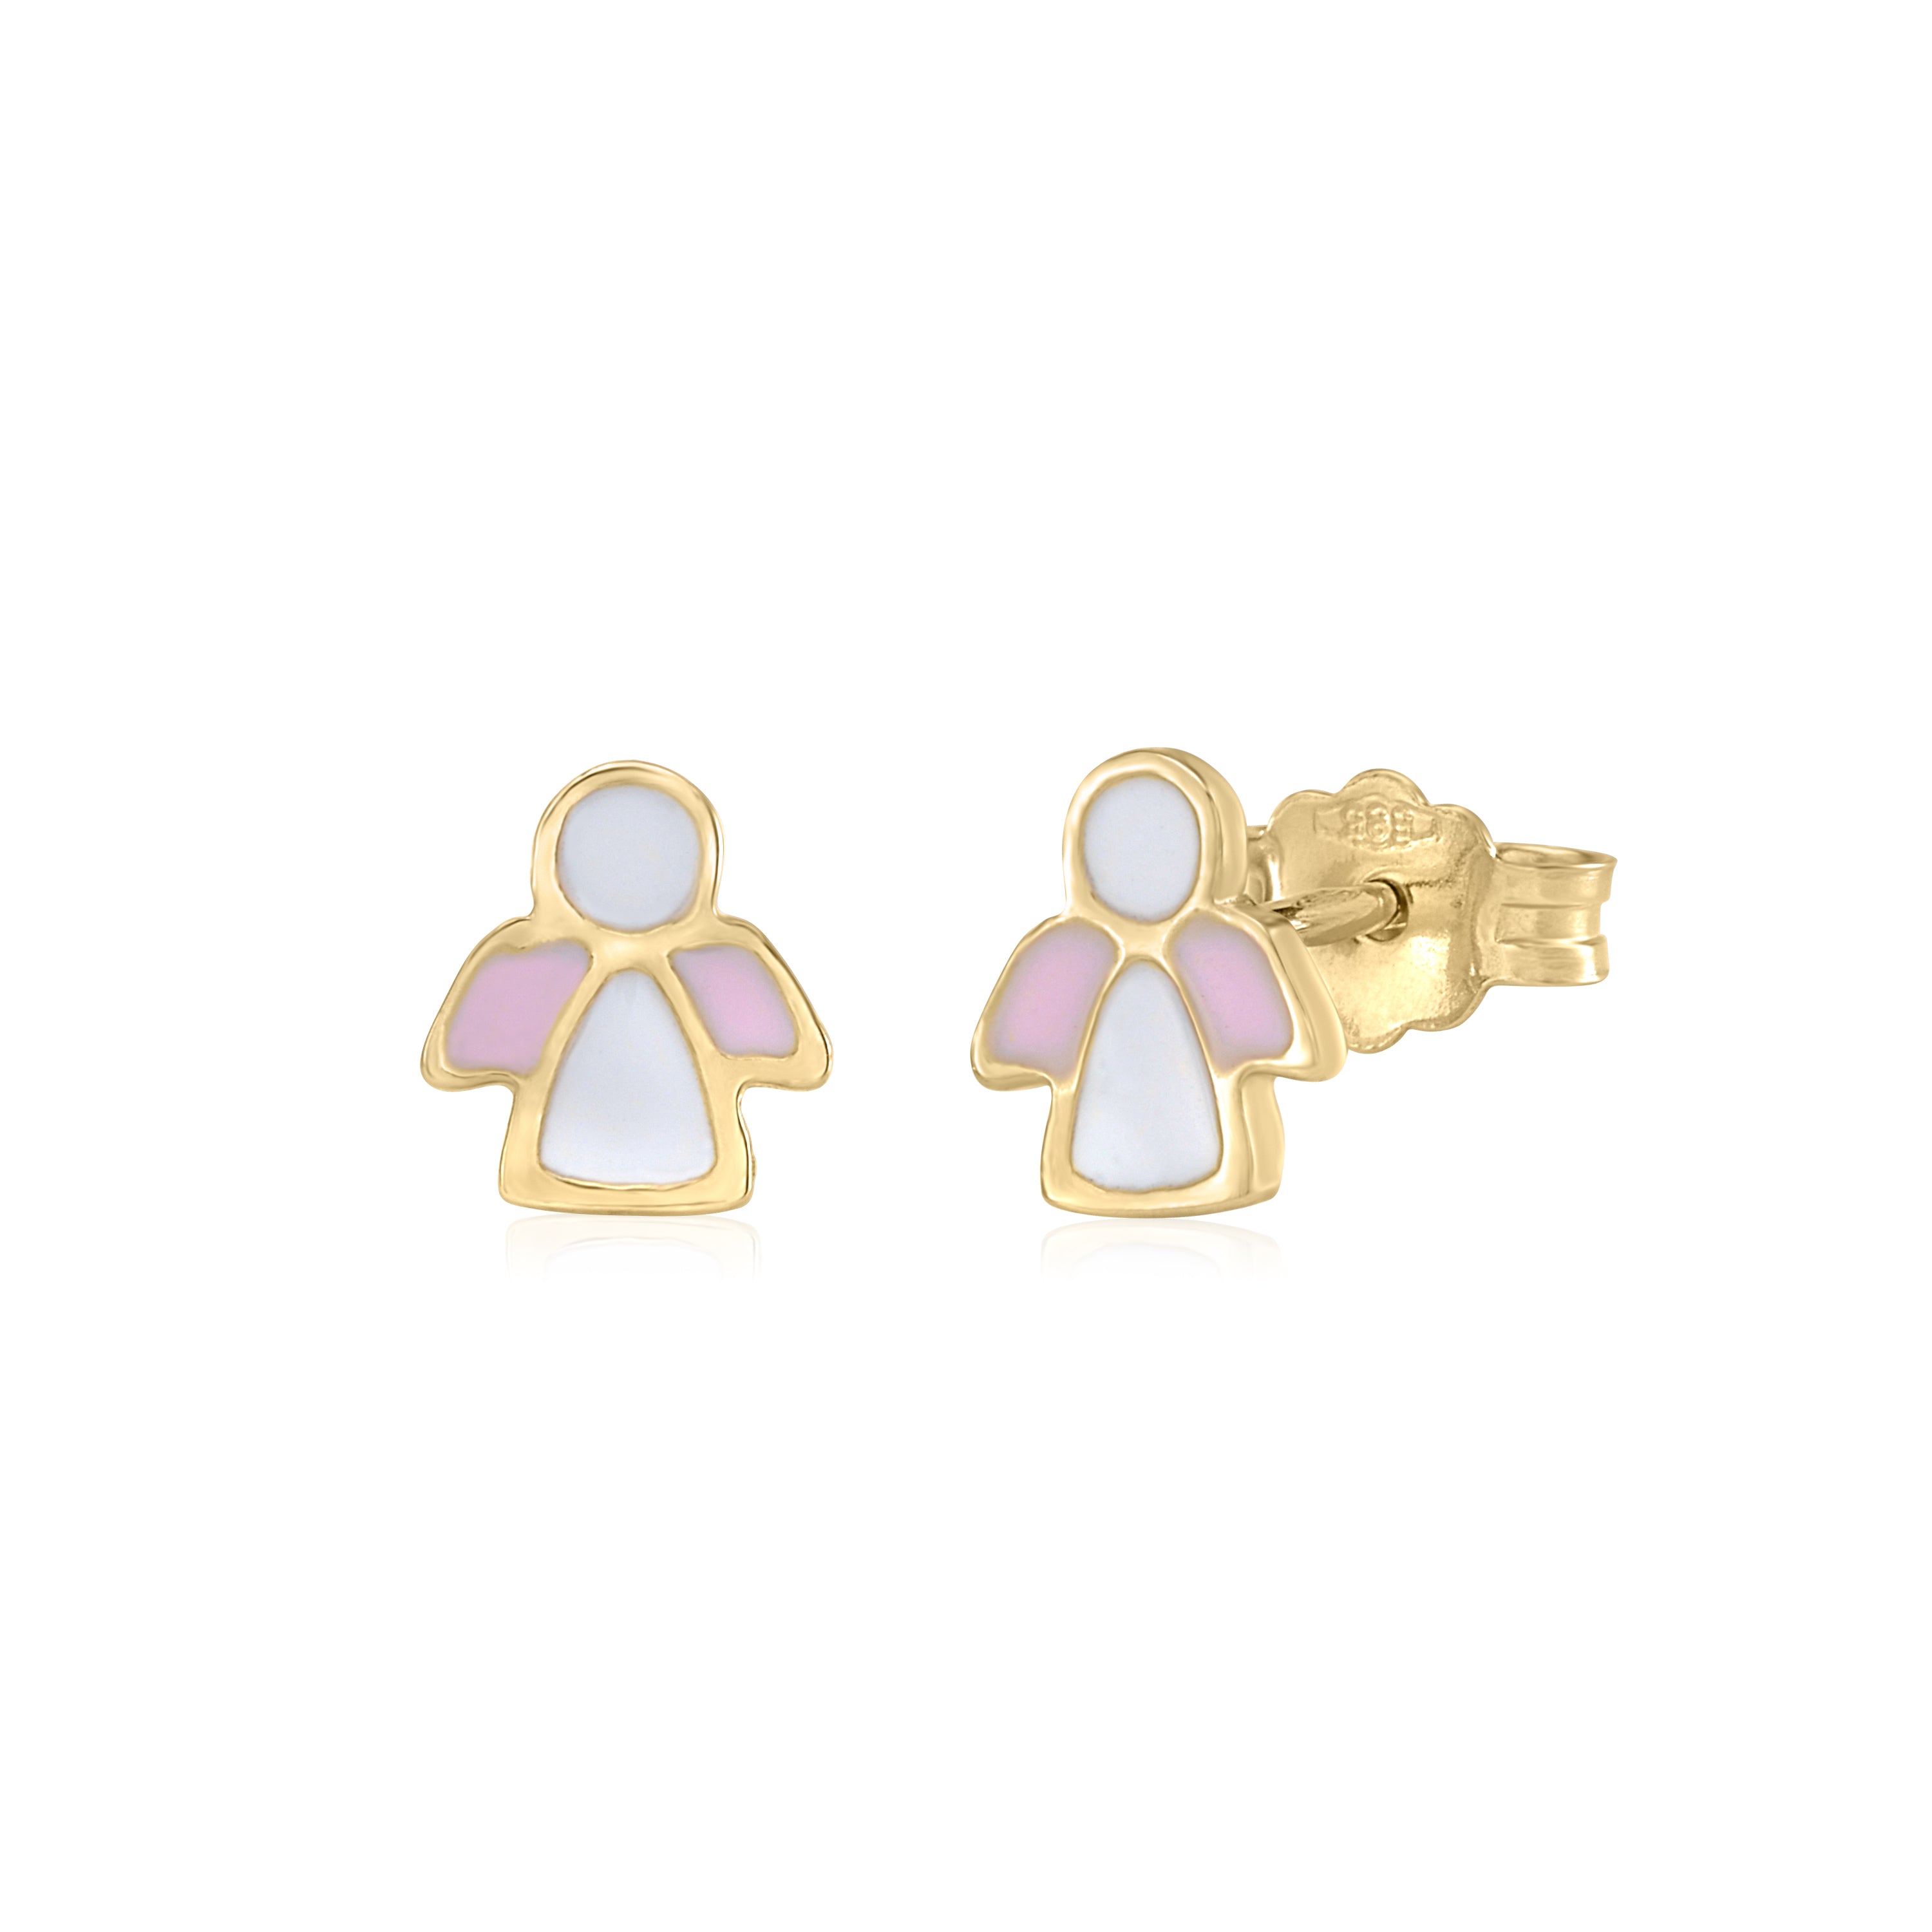 14K Yellow Gold Childrens Cute Guardian Angel Post Stud Earrings with Light Pink and White Enamel